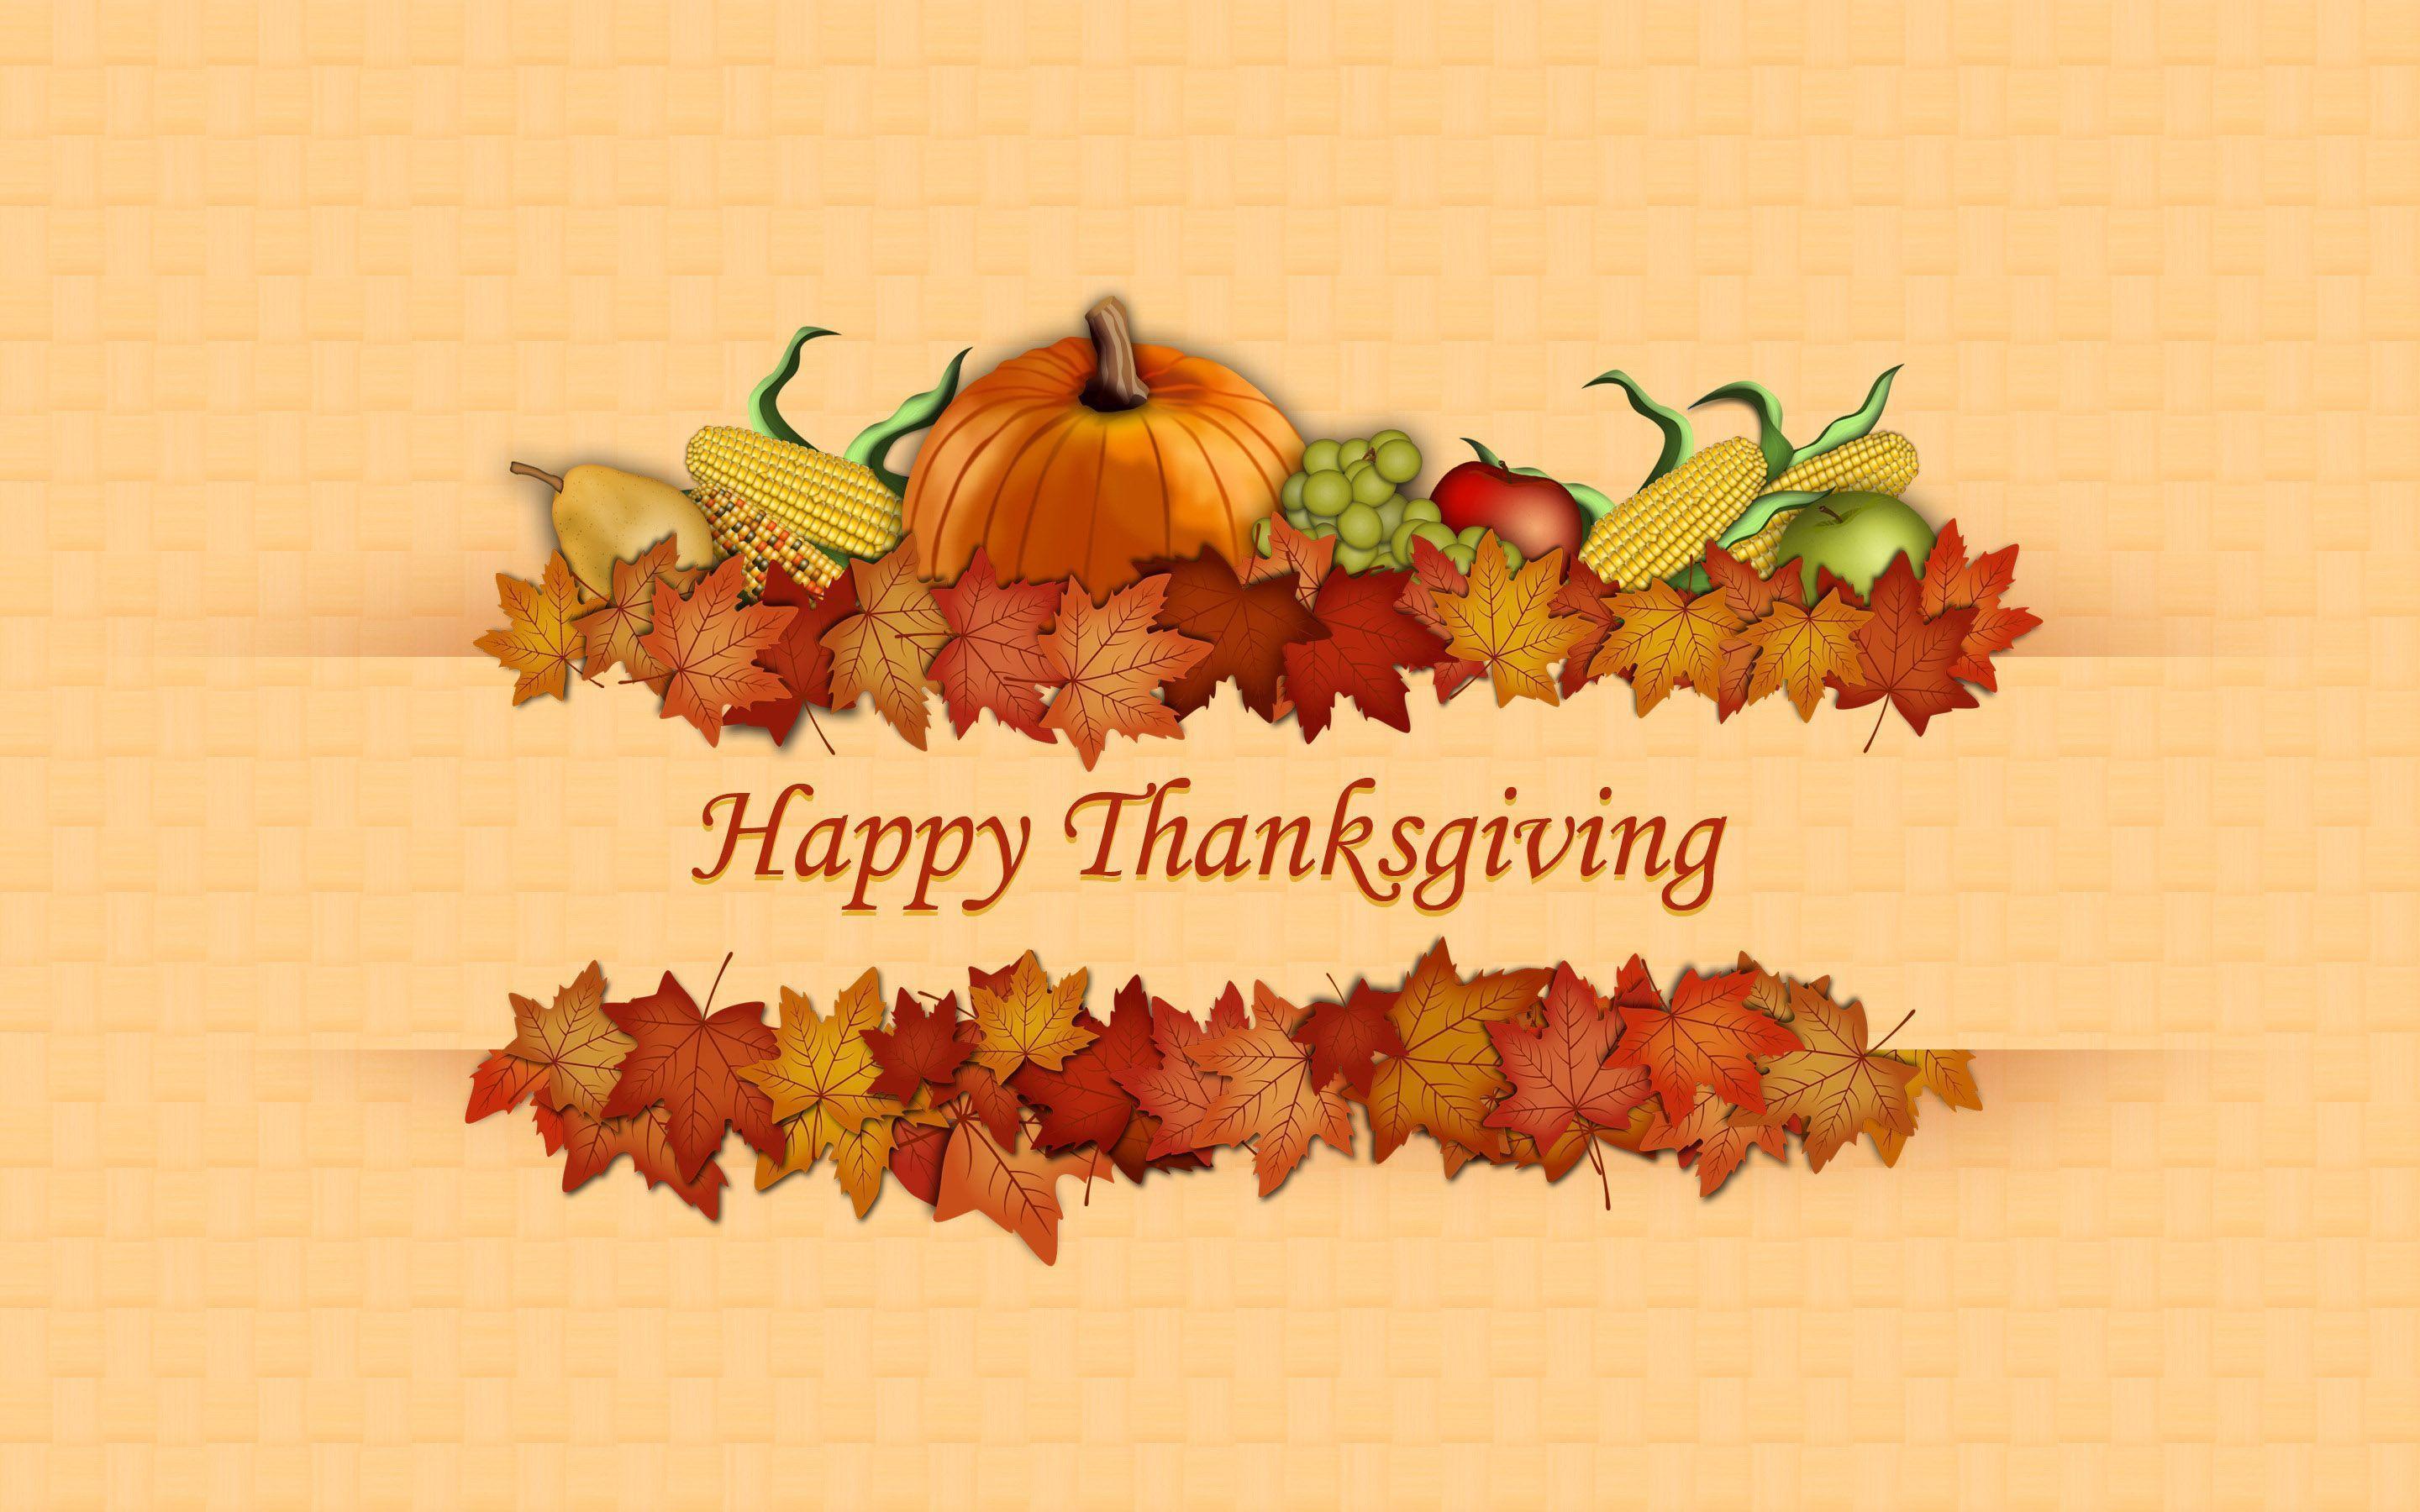 Happy Thanksgiving 2014 Wallpaper Wide or HD